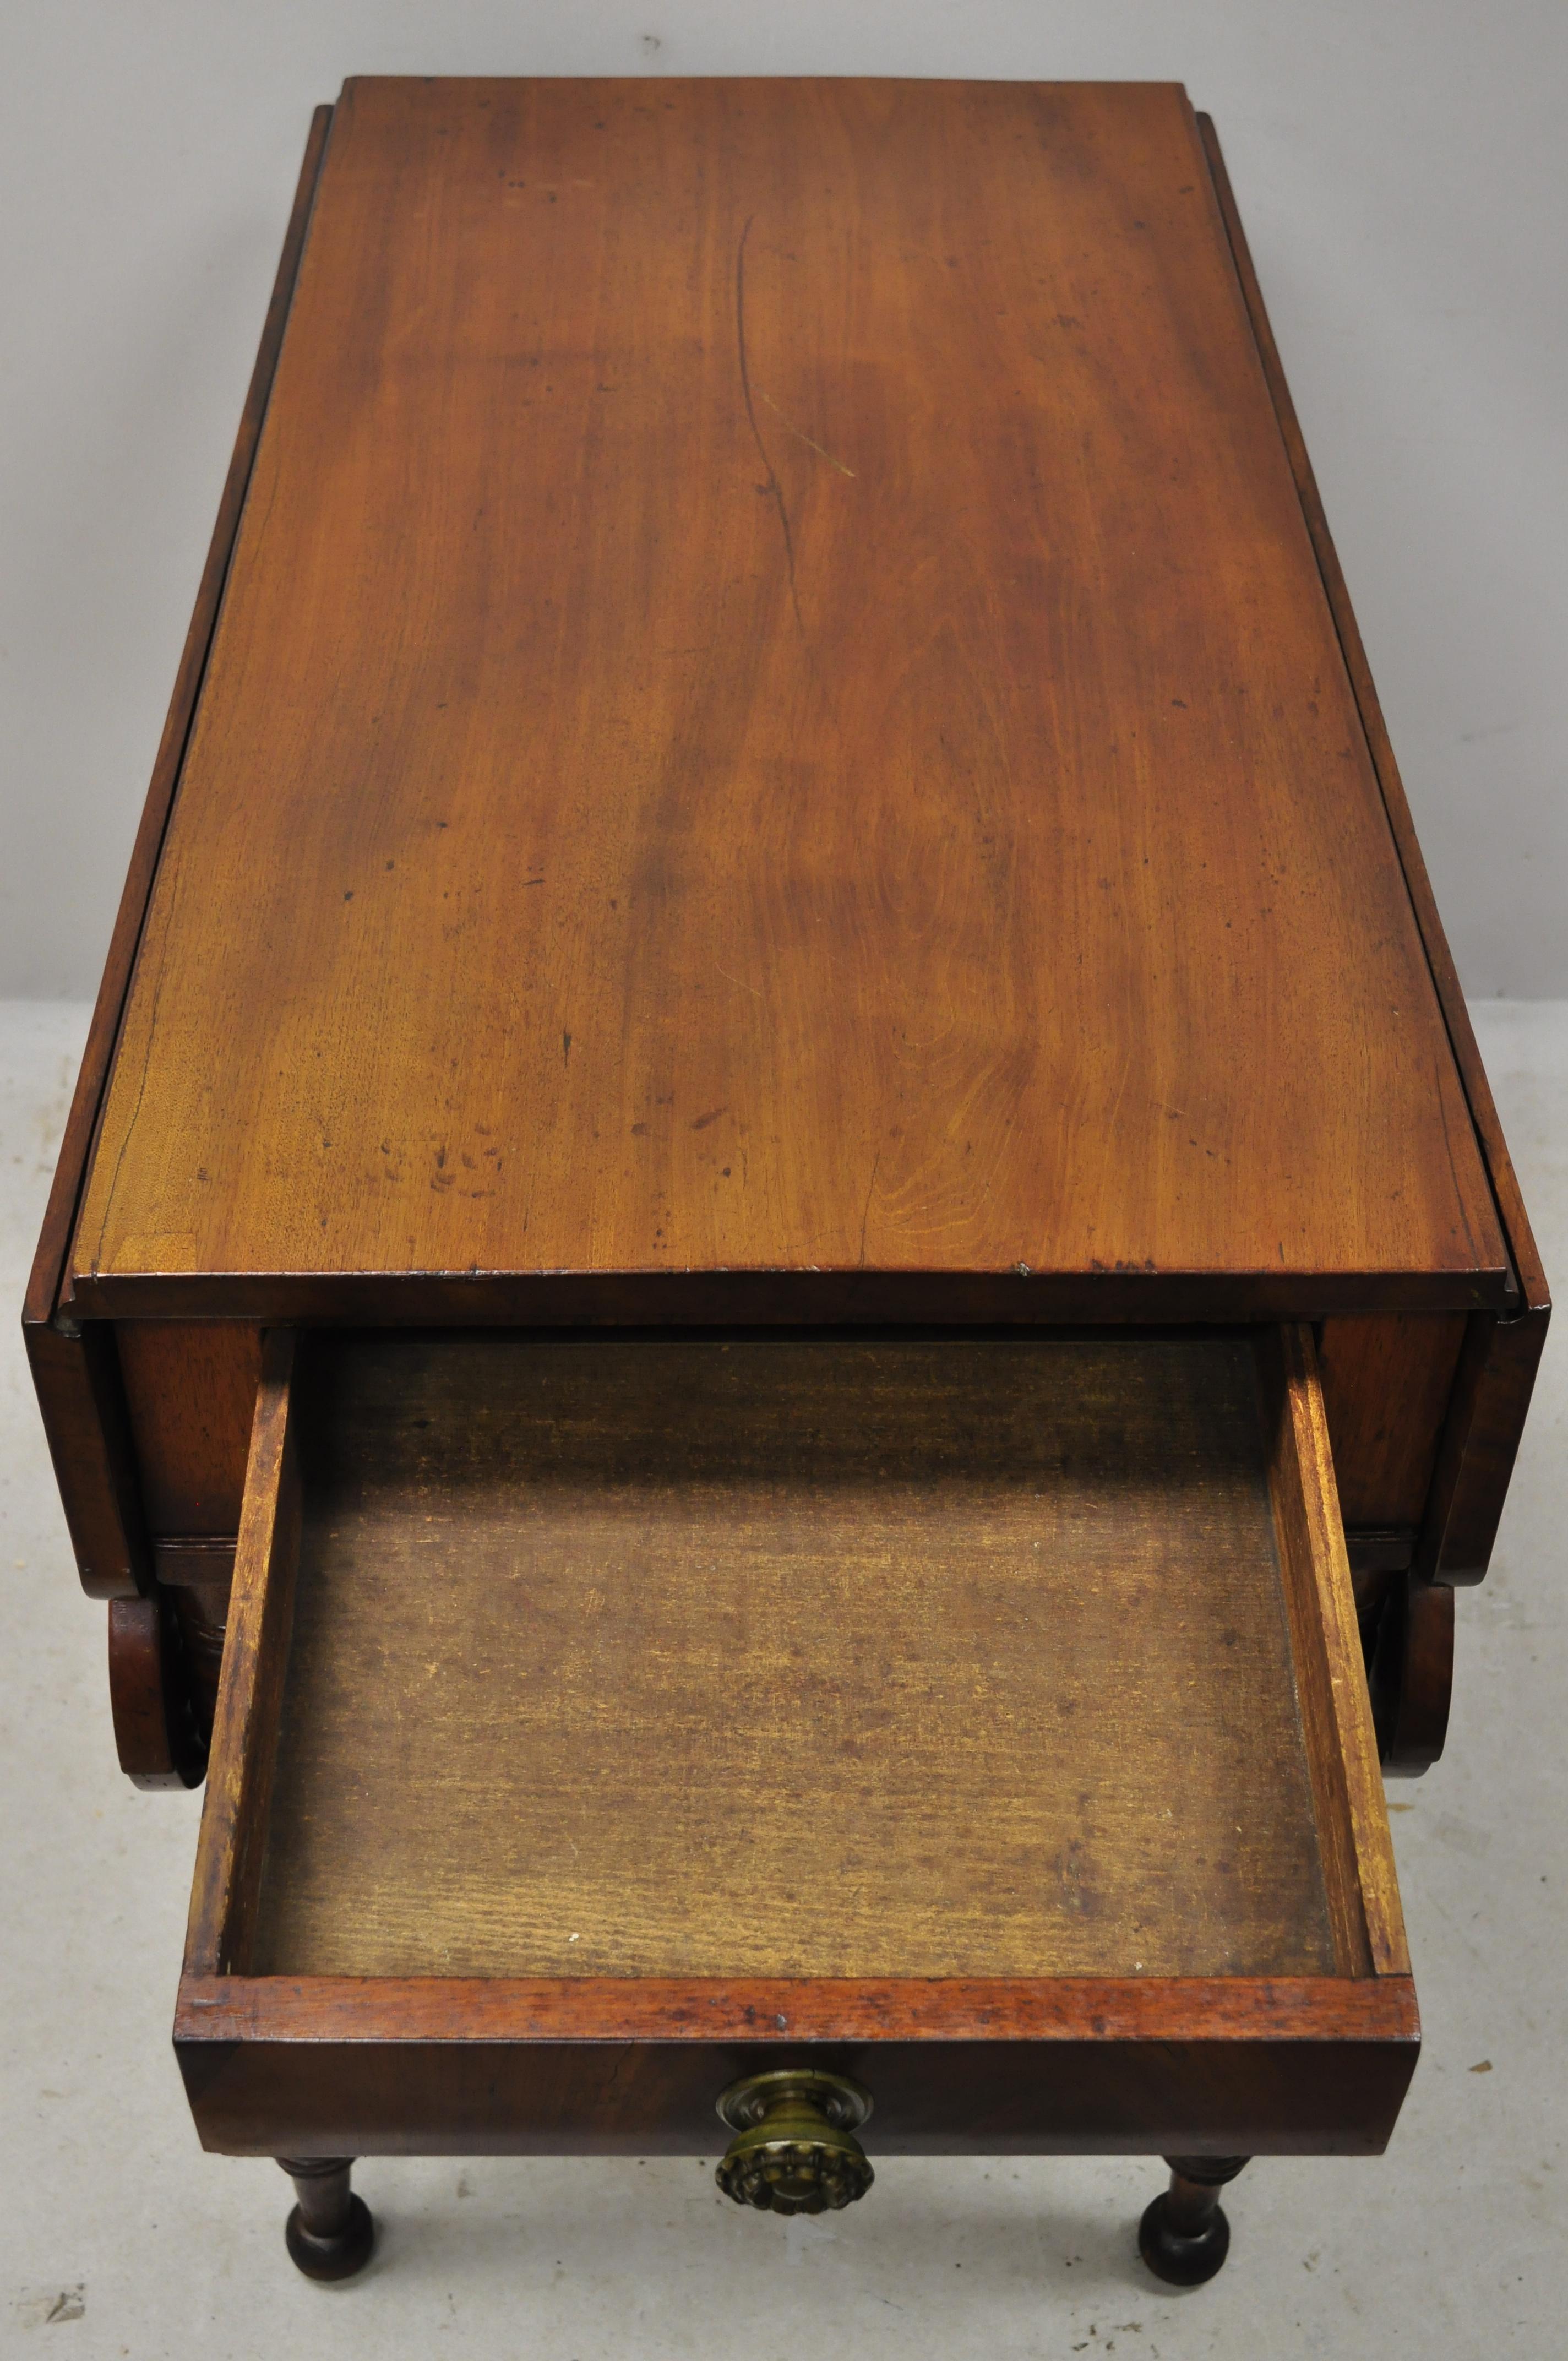 19th Century Scallop Carved Drop Leaf Mahogany Breakfast Dining Table 1-Drawer 4